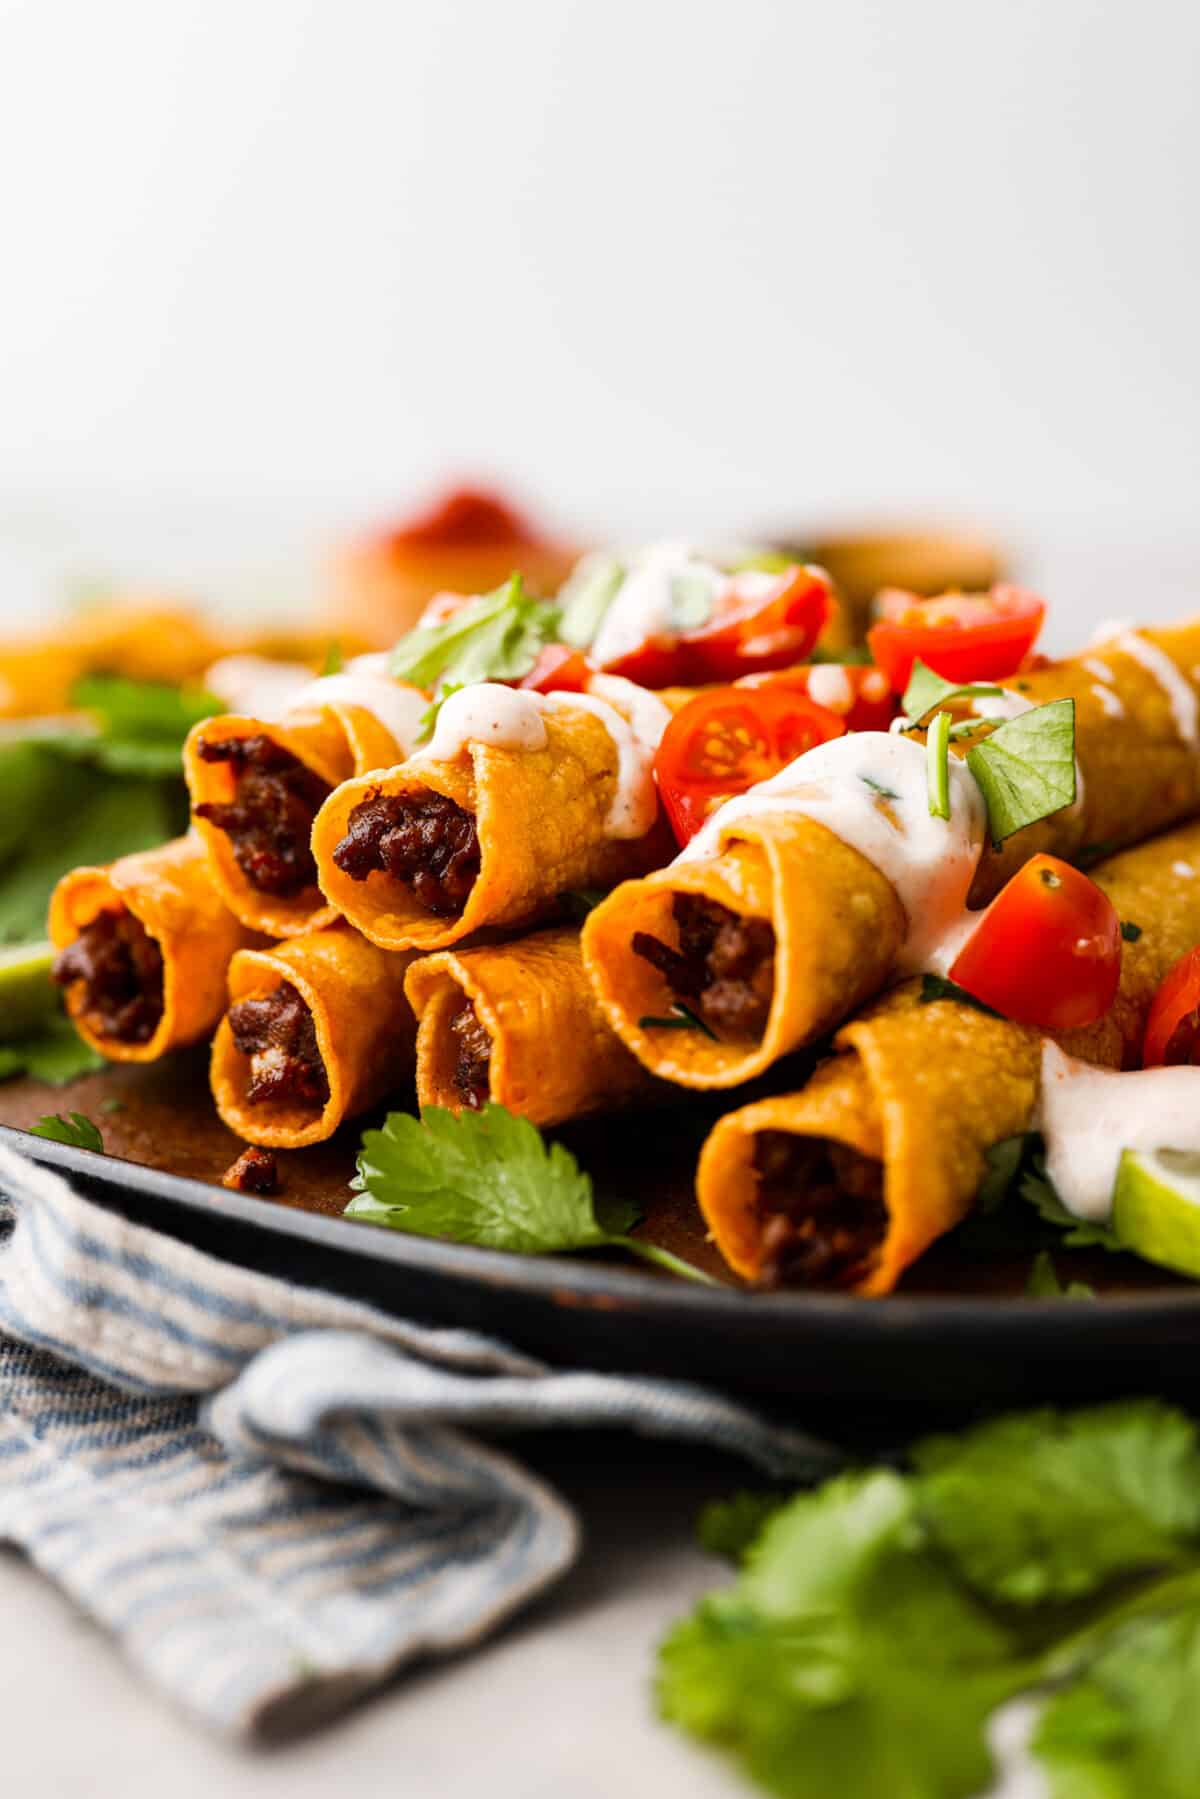 Beef taquitos on a black plate, topped with chopped tomatoes and sour cream.